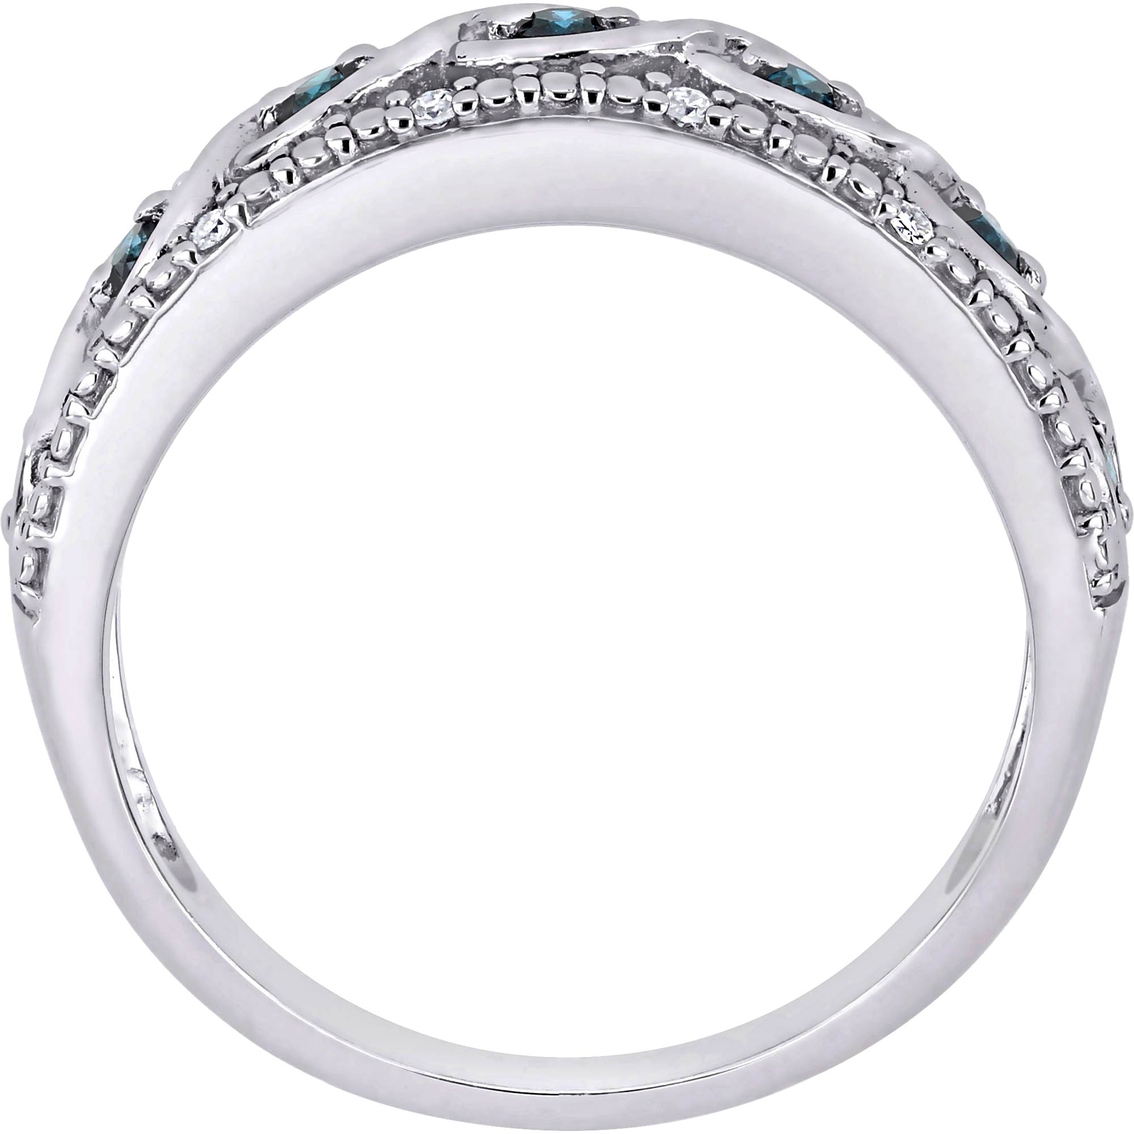 Sofia B. Sterling Silver 1/4 CTW Blue and White Diamond Filigree Anniversary Band - Image 3 of 4